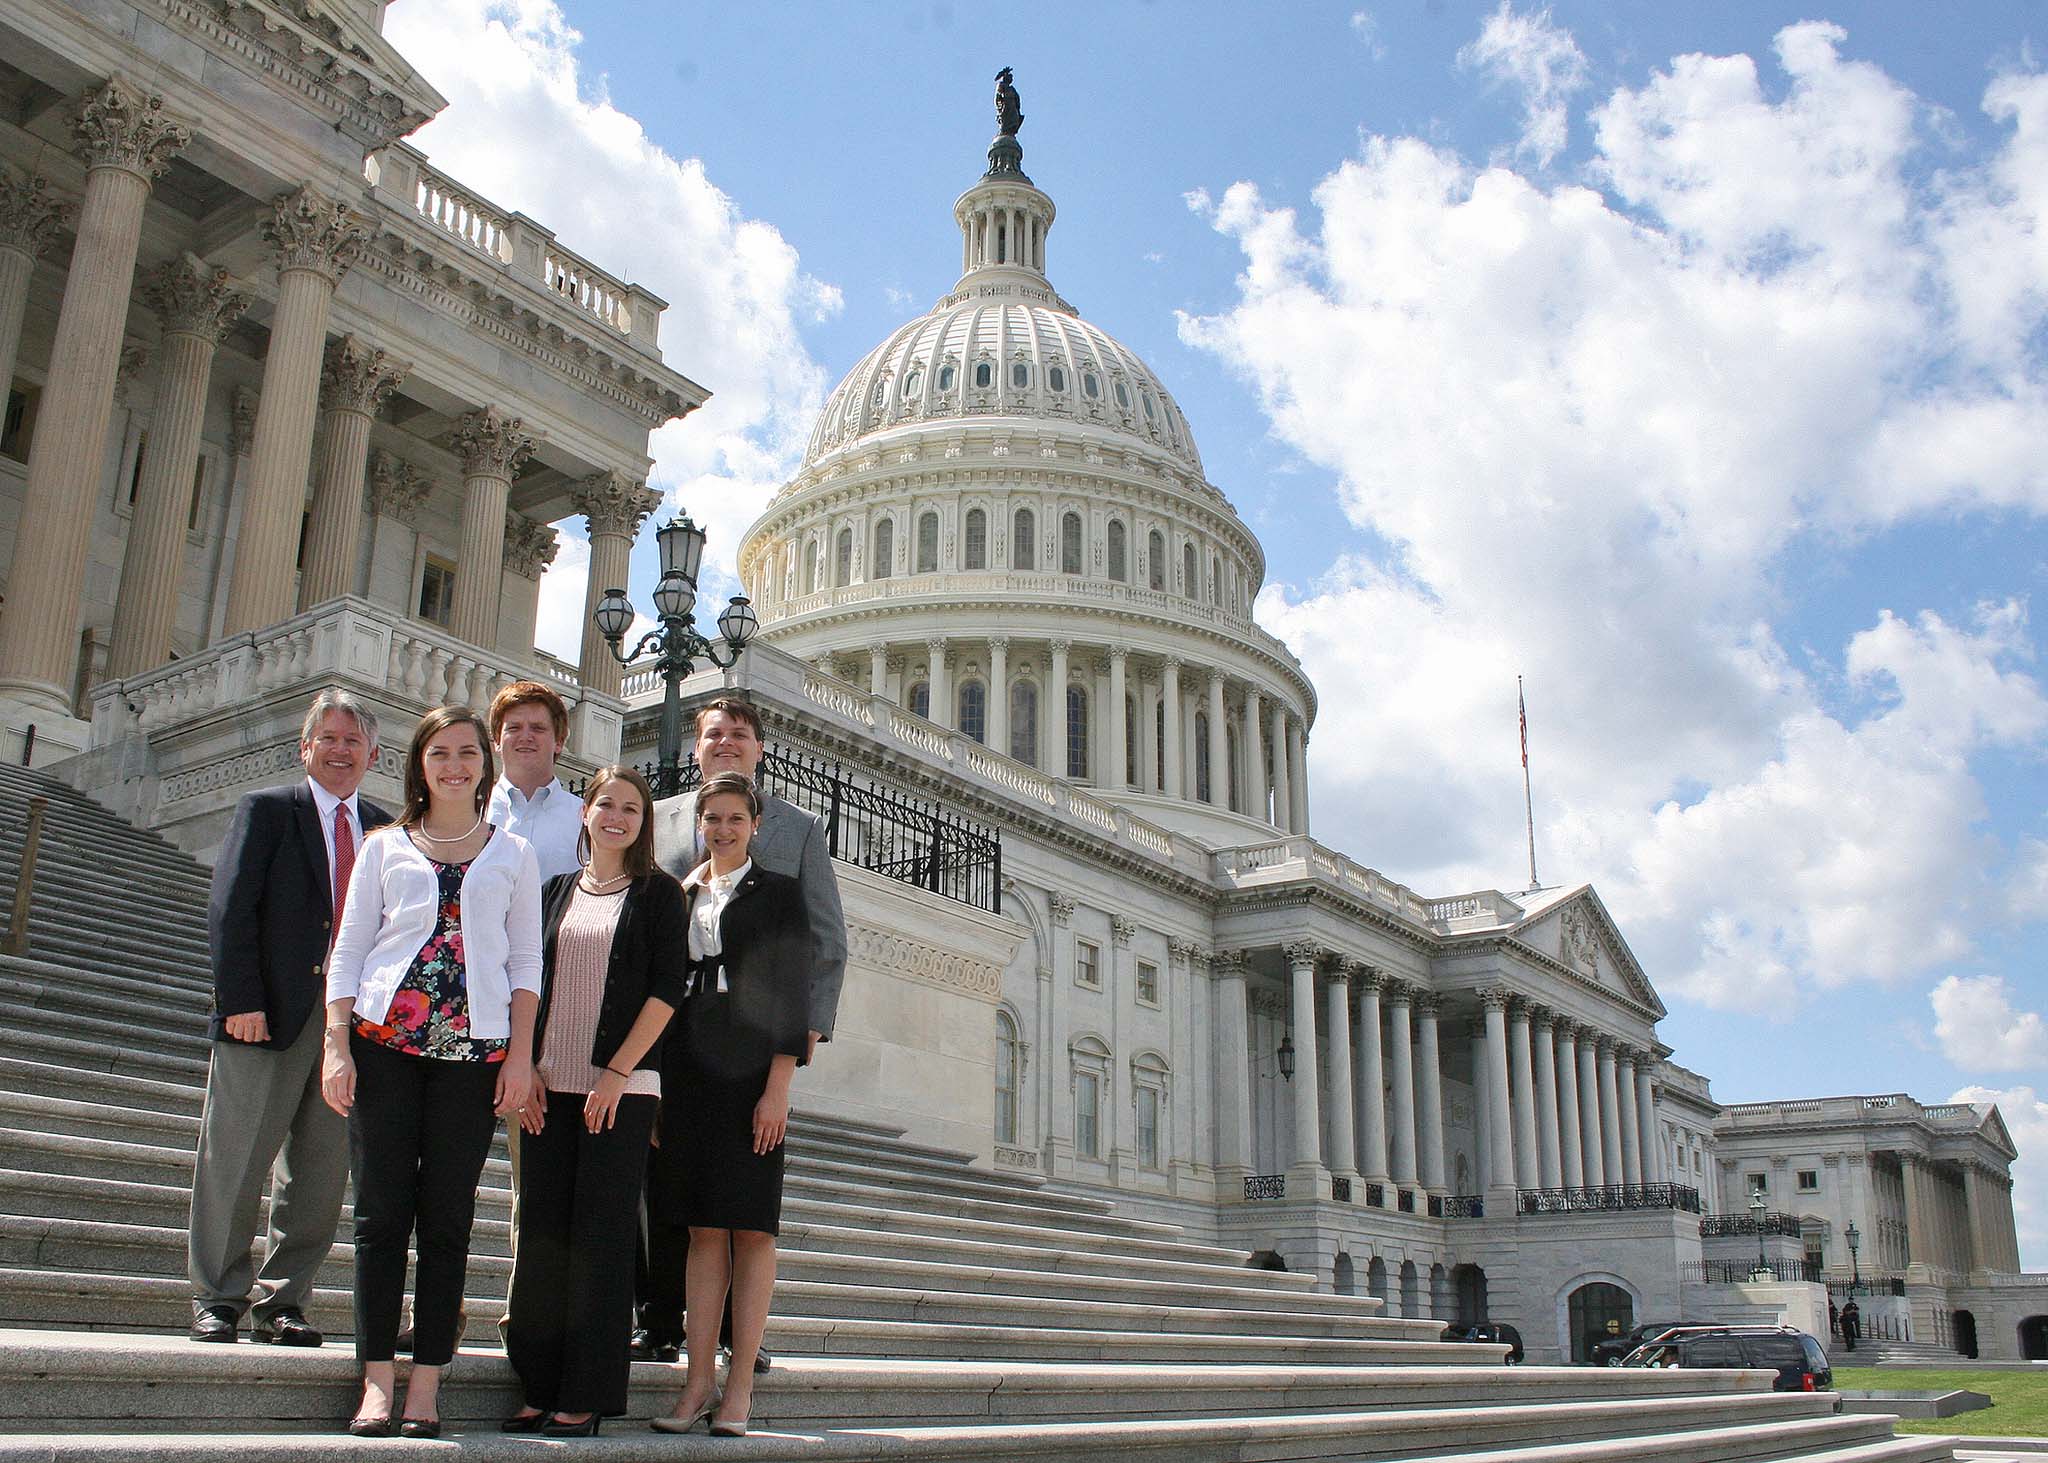 Associate Dean for Academics Josef Broder stands with CAES Agricultural D.C. Fellows Valerie Noles, Rebecca Rykard, Heather Hatzenbuhler, William Moses and Lee Lister at the capital during summer 2013.